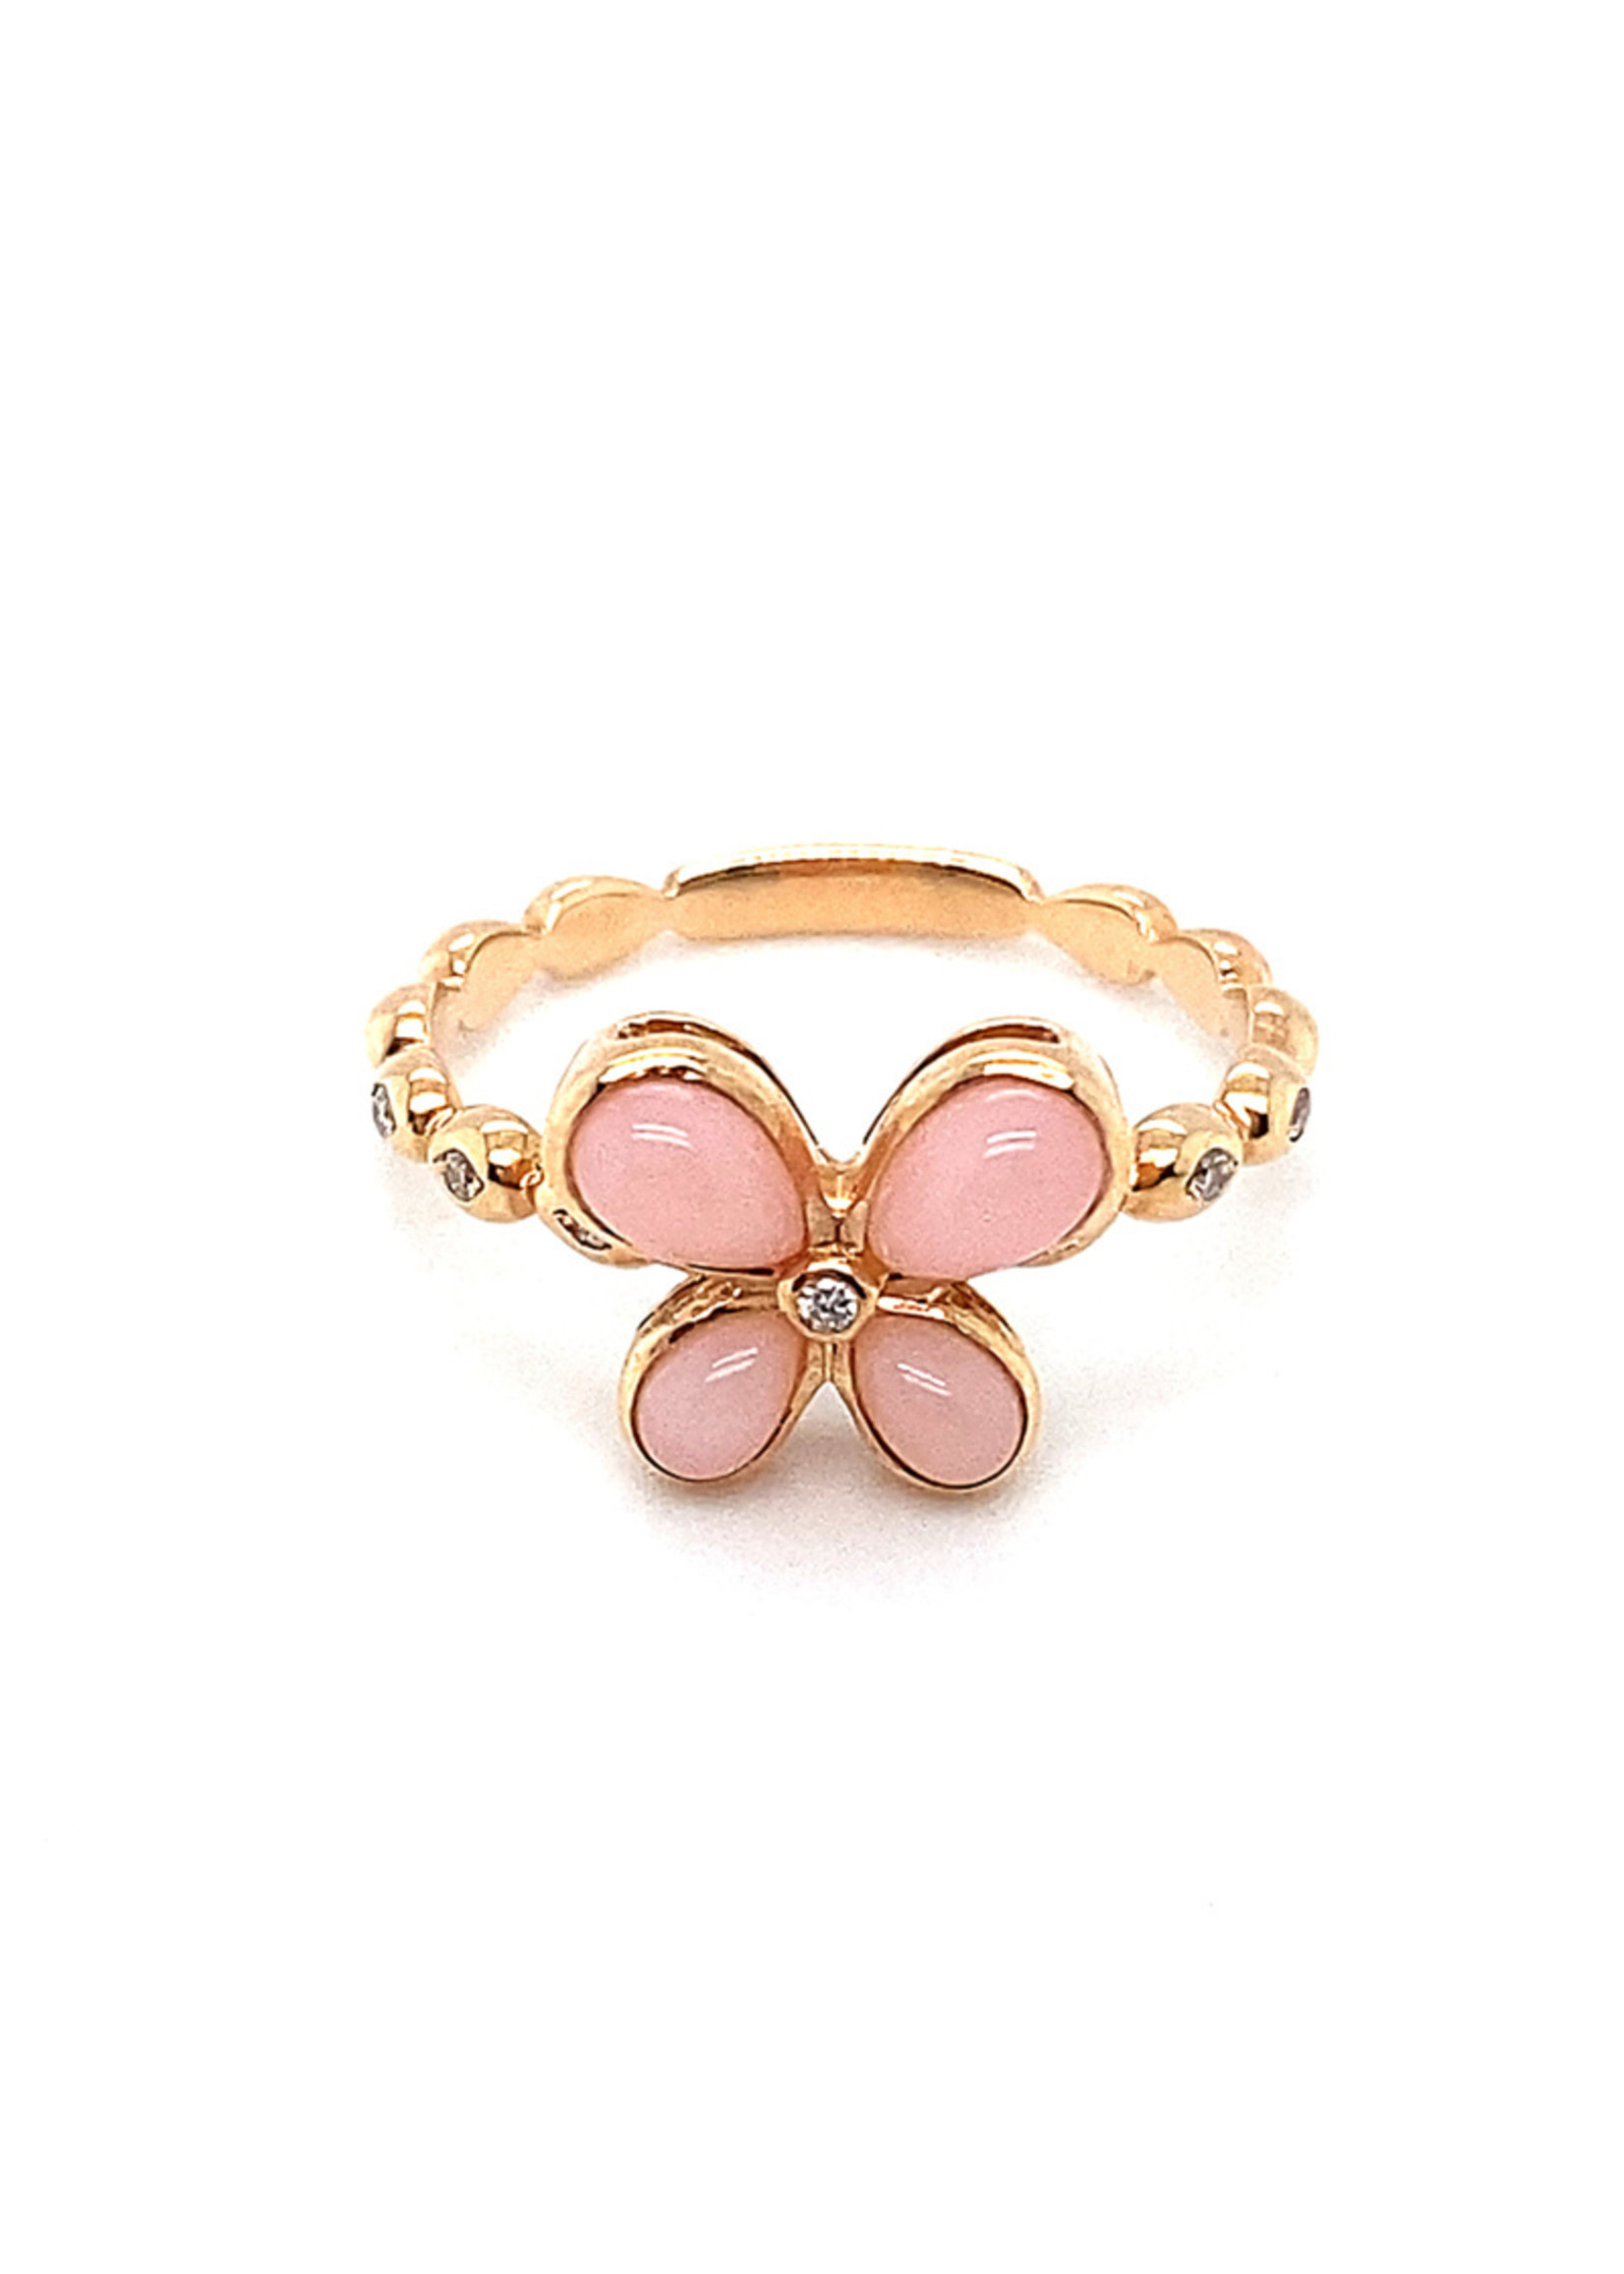 Vintage & Occasion Arthur scholl ring pink opal - diamant